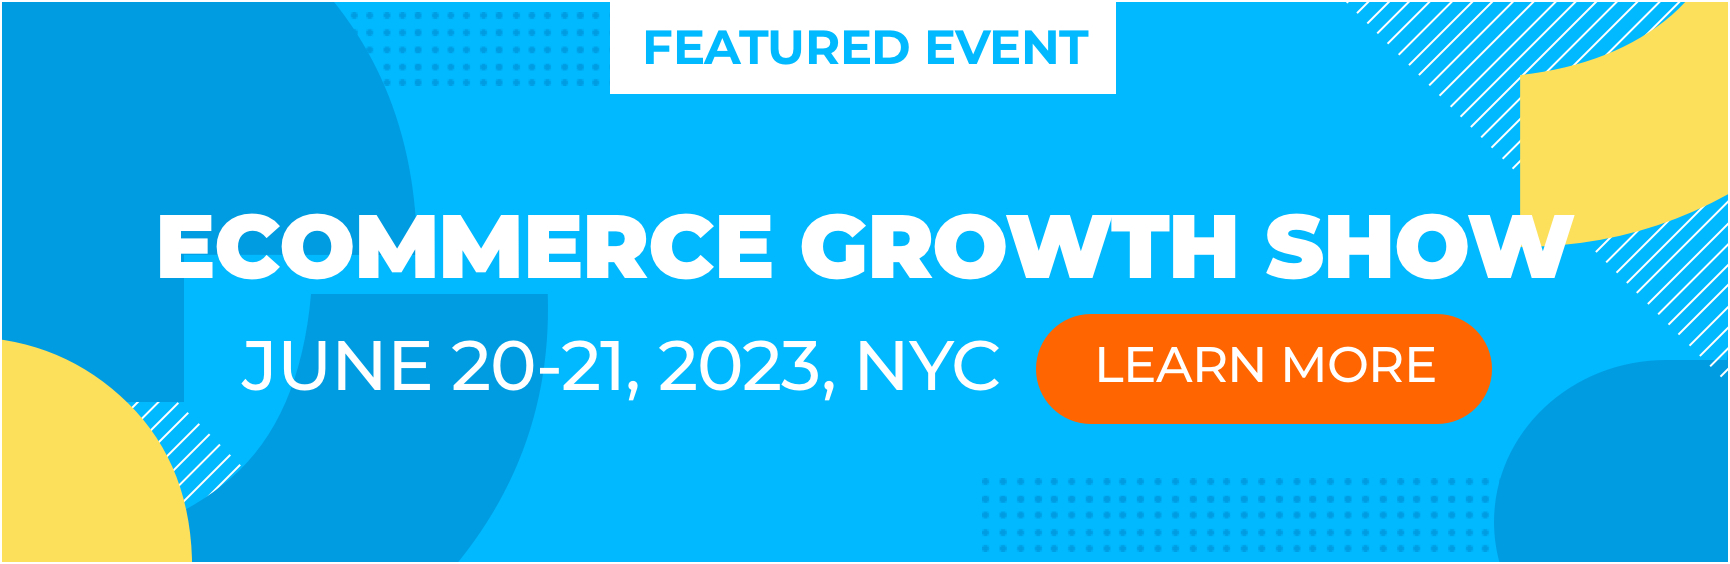 featured ecommerce growth show